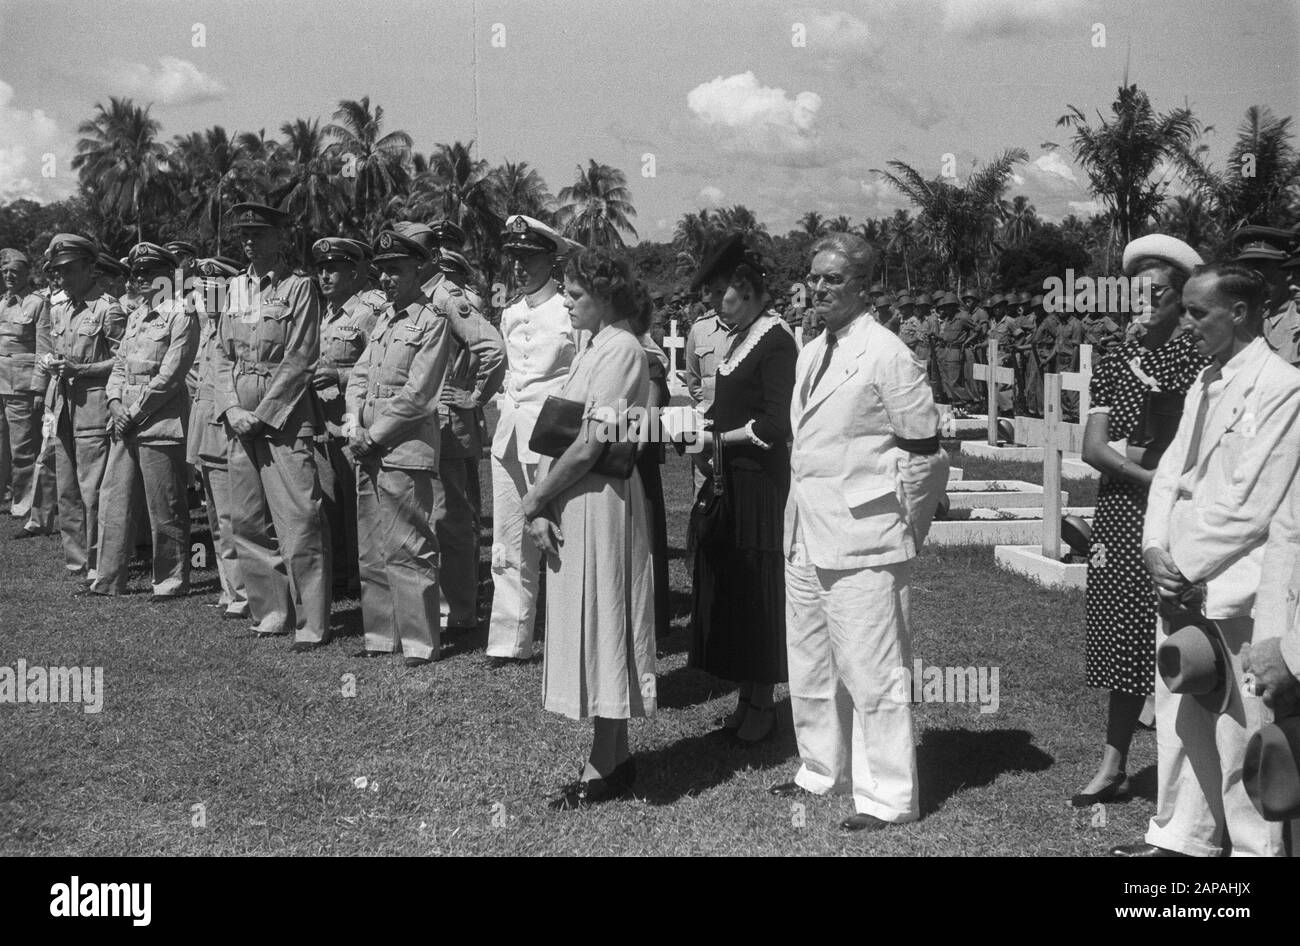 Burial General Rail Description: Burial General Rail [on Honorary Field  Menteng Pulo] [Captain Lieutenant ter Sea M. Spoor (nephew) the widow Mrs.  Spoor-Dijkema, brother André Spoor and some officers] Date: 28 May